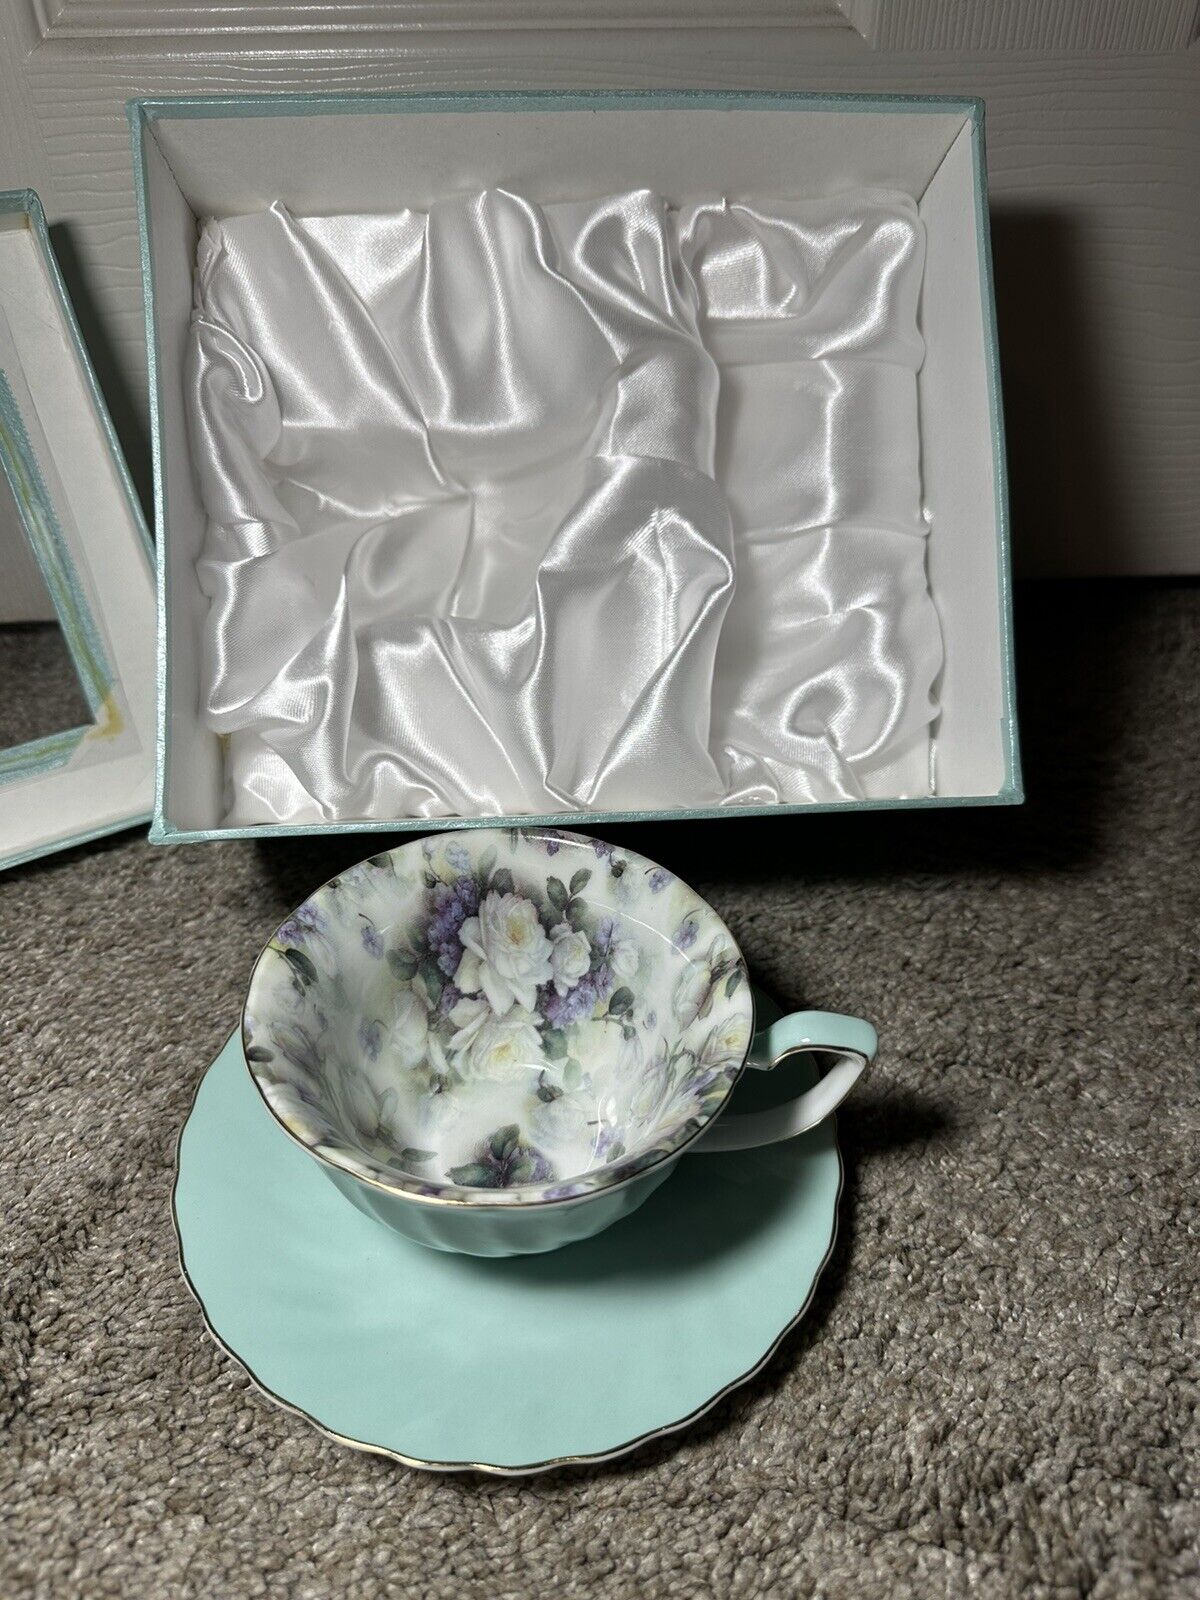 New In Box Porcelain Treasures Cup And Saucer Betty Platner Teal Floral